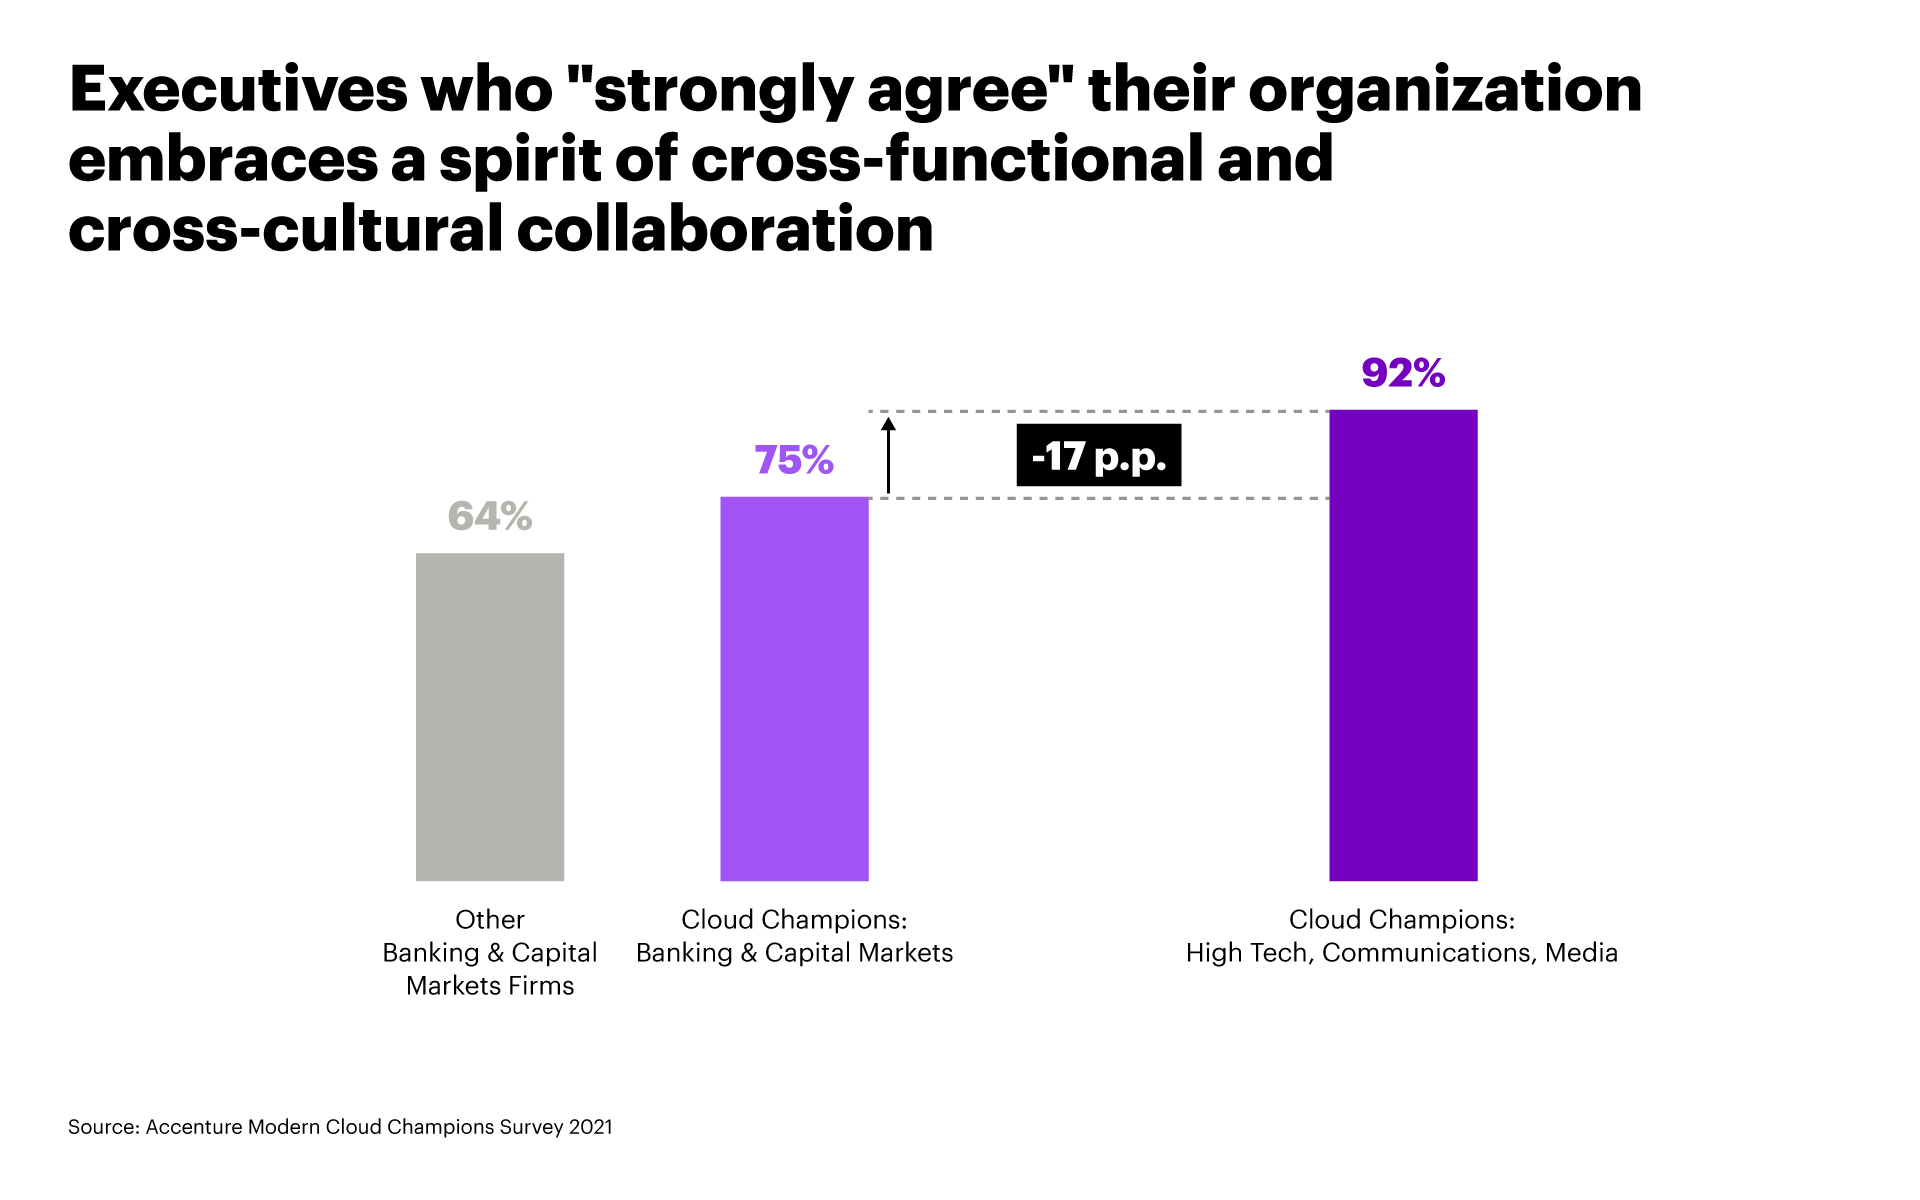 Executives who "strongly agree" their organization embraces a spirit of cross-functional and cross-cultural collaboration